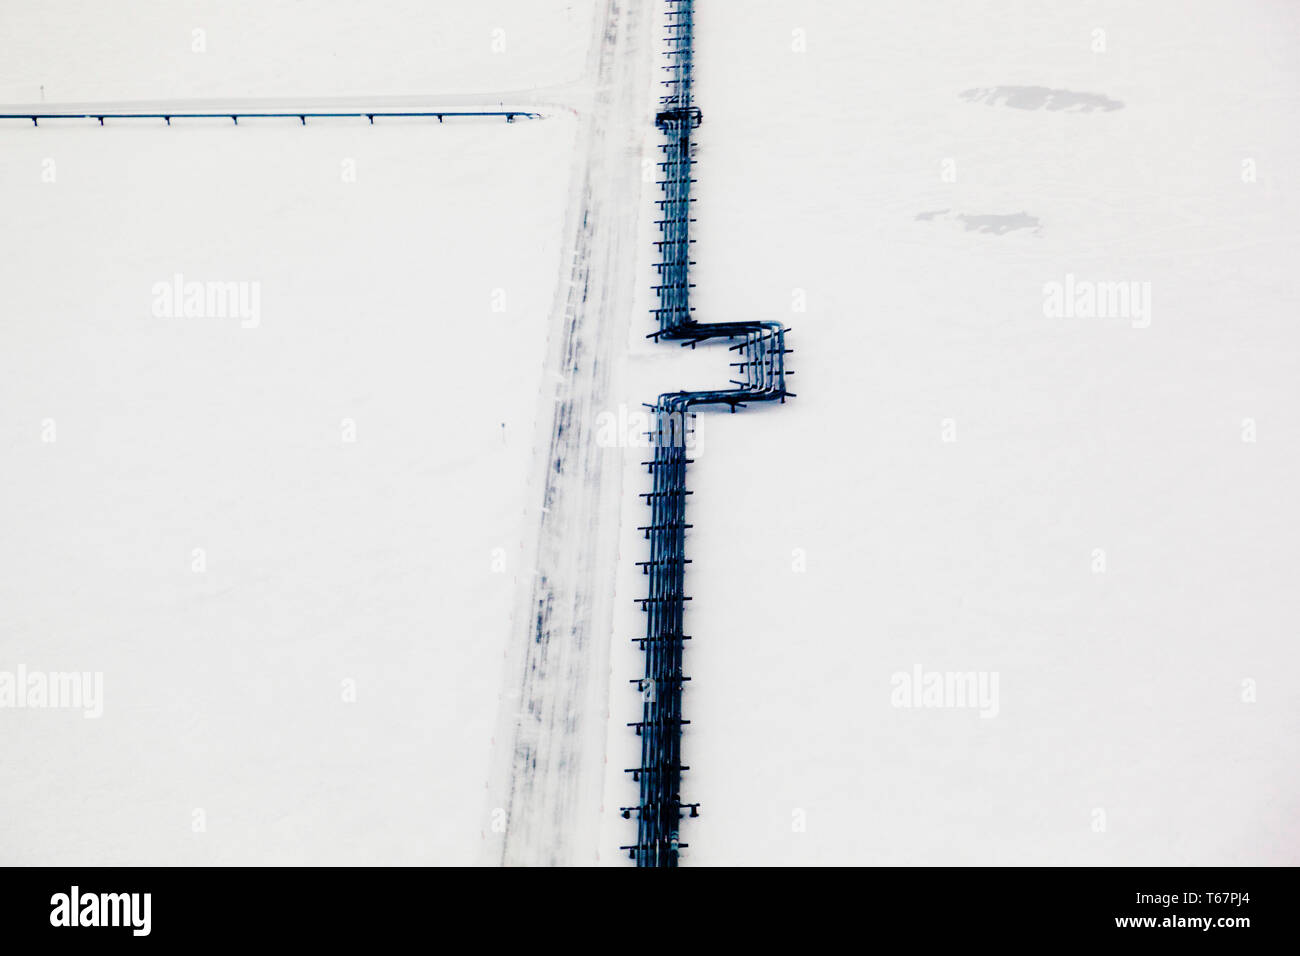 Oil pipeline and iceroad leading from the ConocoPhillips oilwells in Alpine, connecting to the Pump station 1 on the Alyeska Pipeline in Prudhoe Bay, the northern start of the Trans-Alaska Pipeline System. Stock Photo